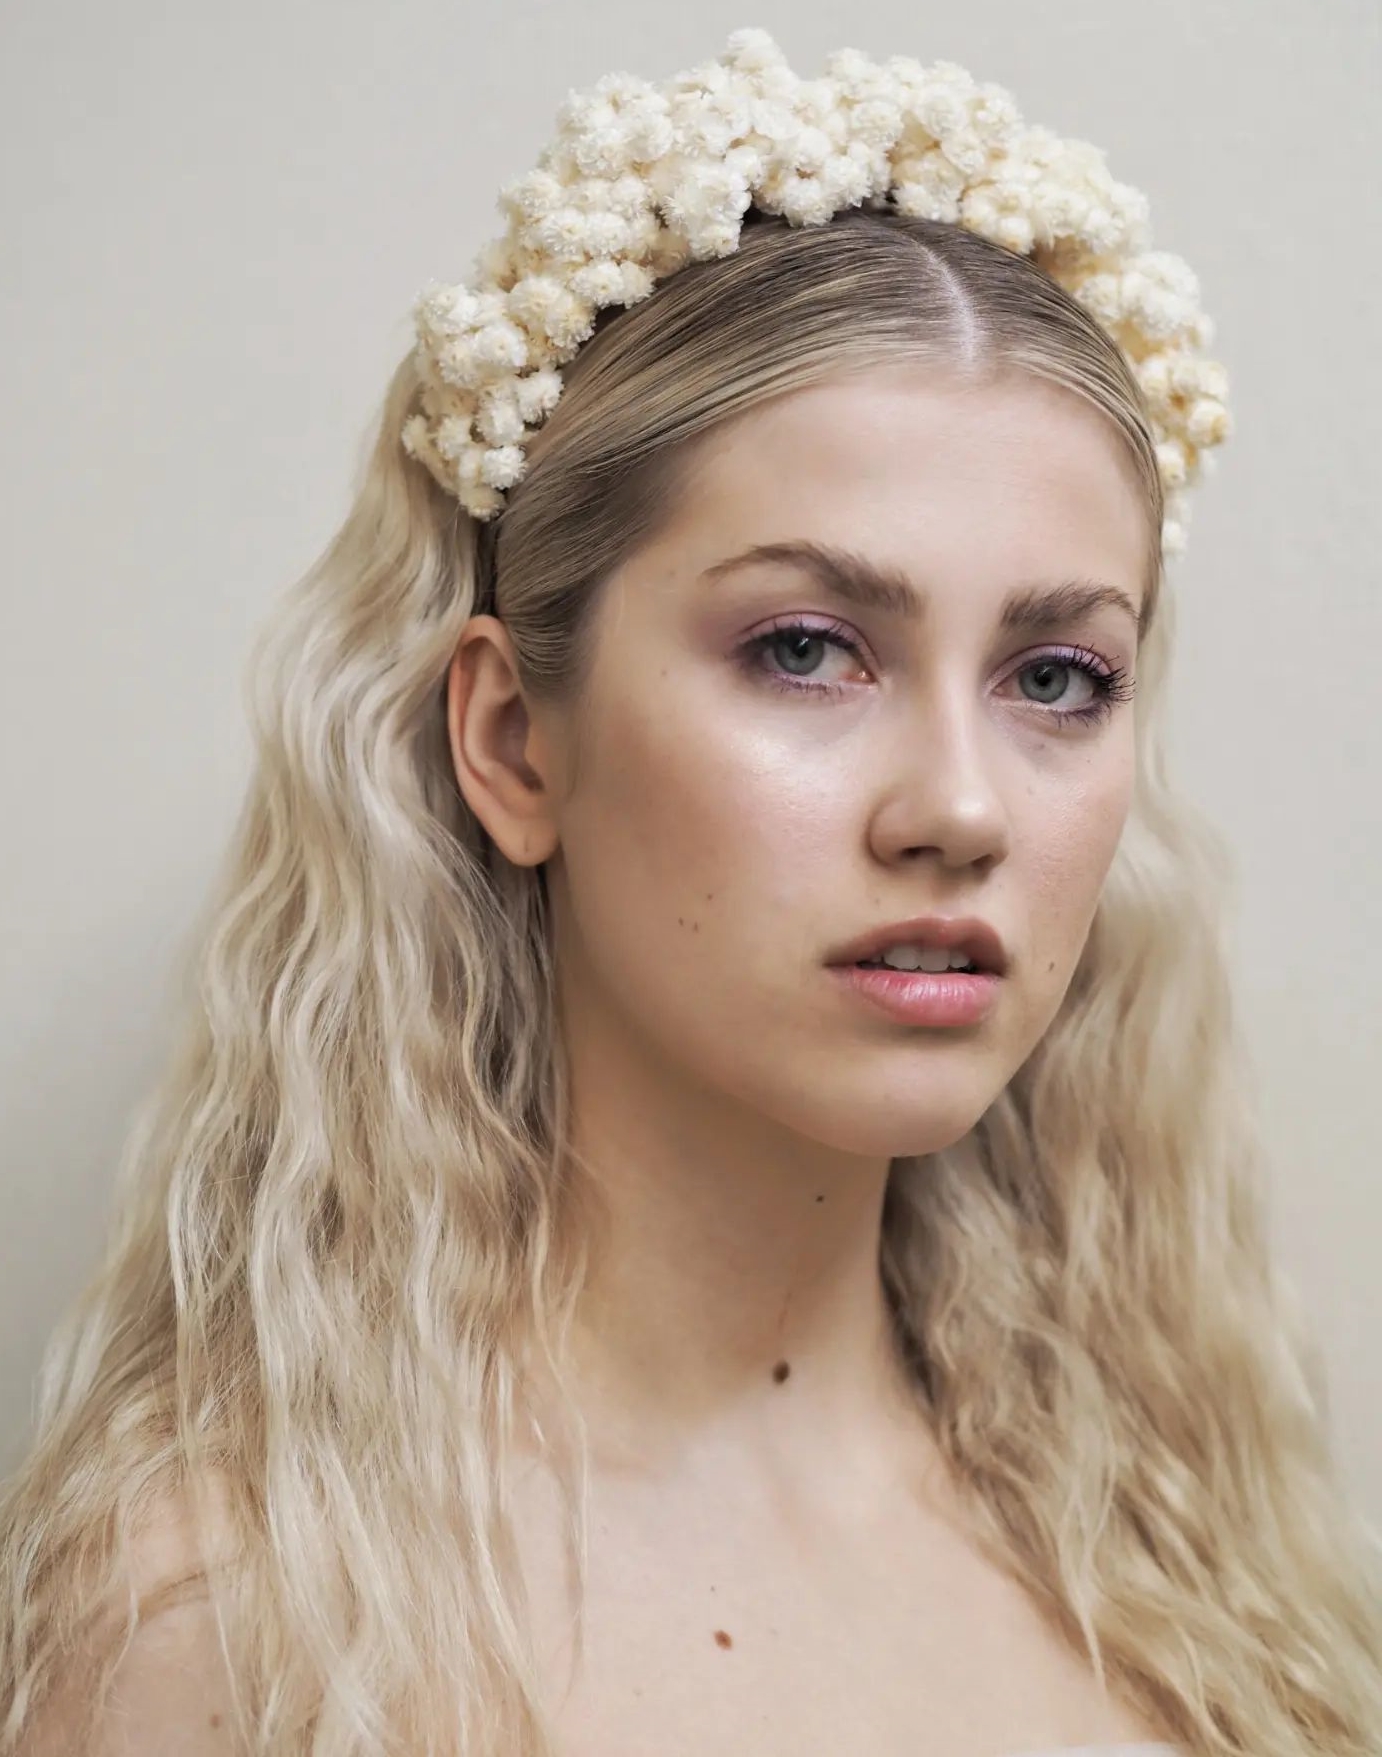 Long Blonde Bridal Hair with White Fluffy Flower Crown